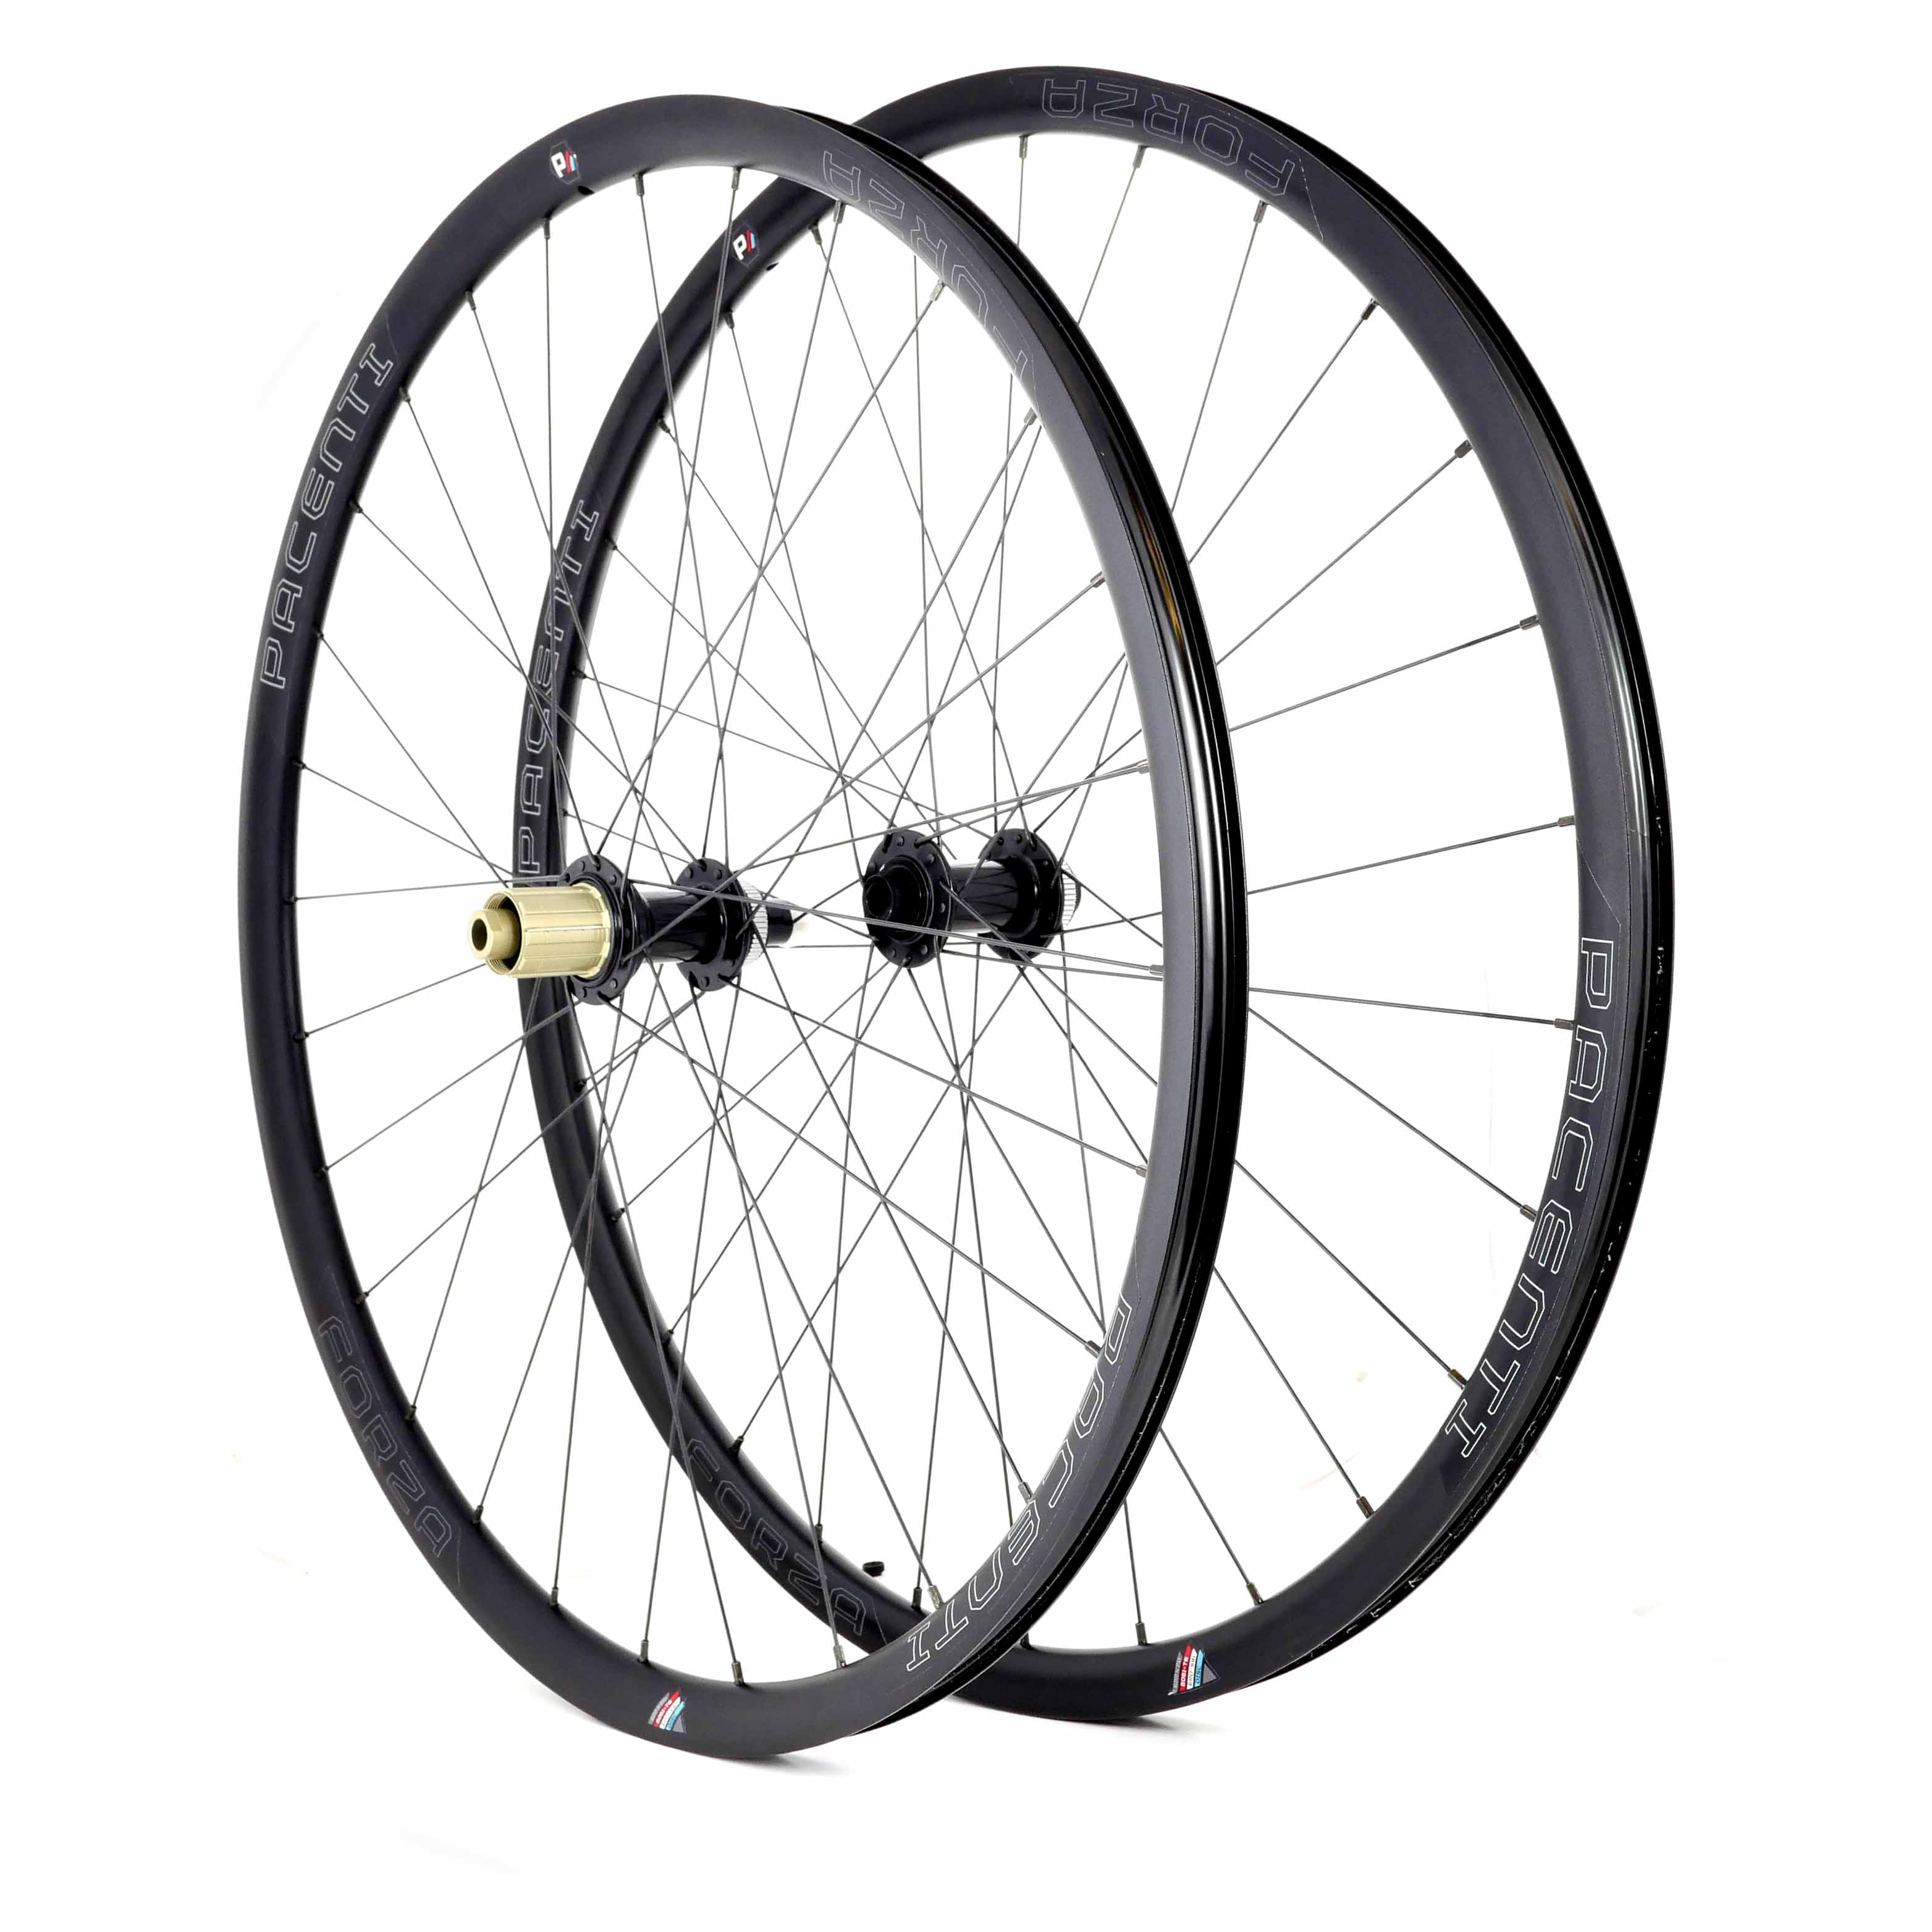 Forza wheelset centre lock disc brake c mm – Pacenti Cycle Design